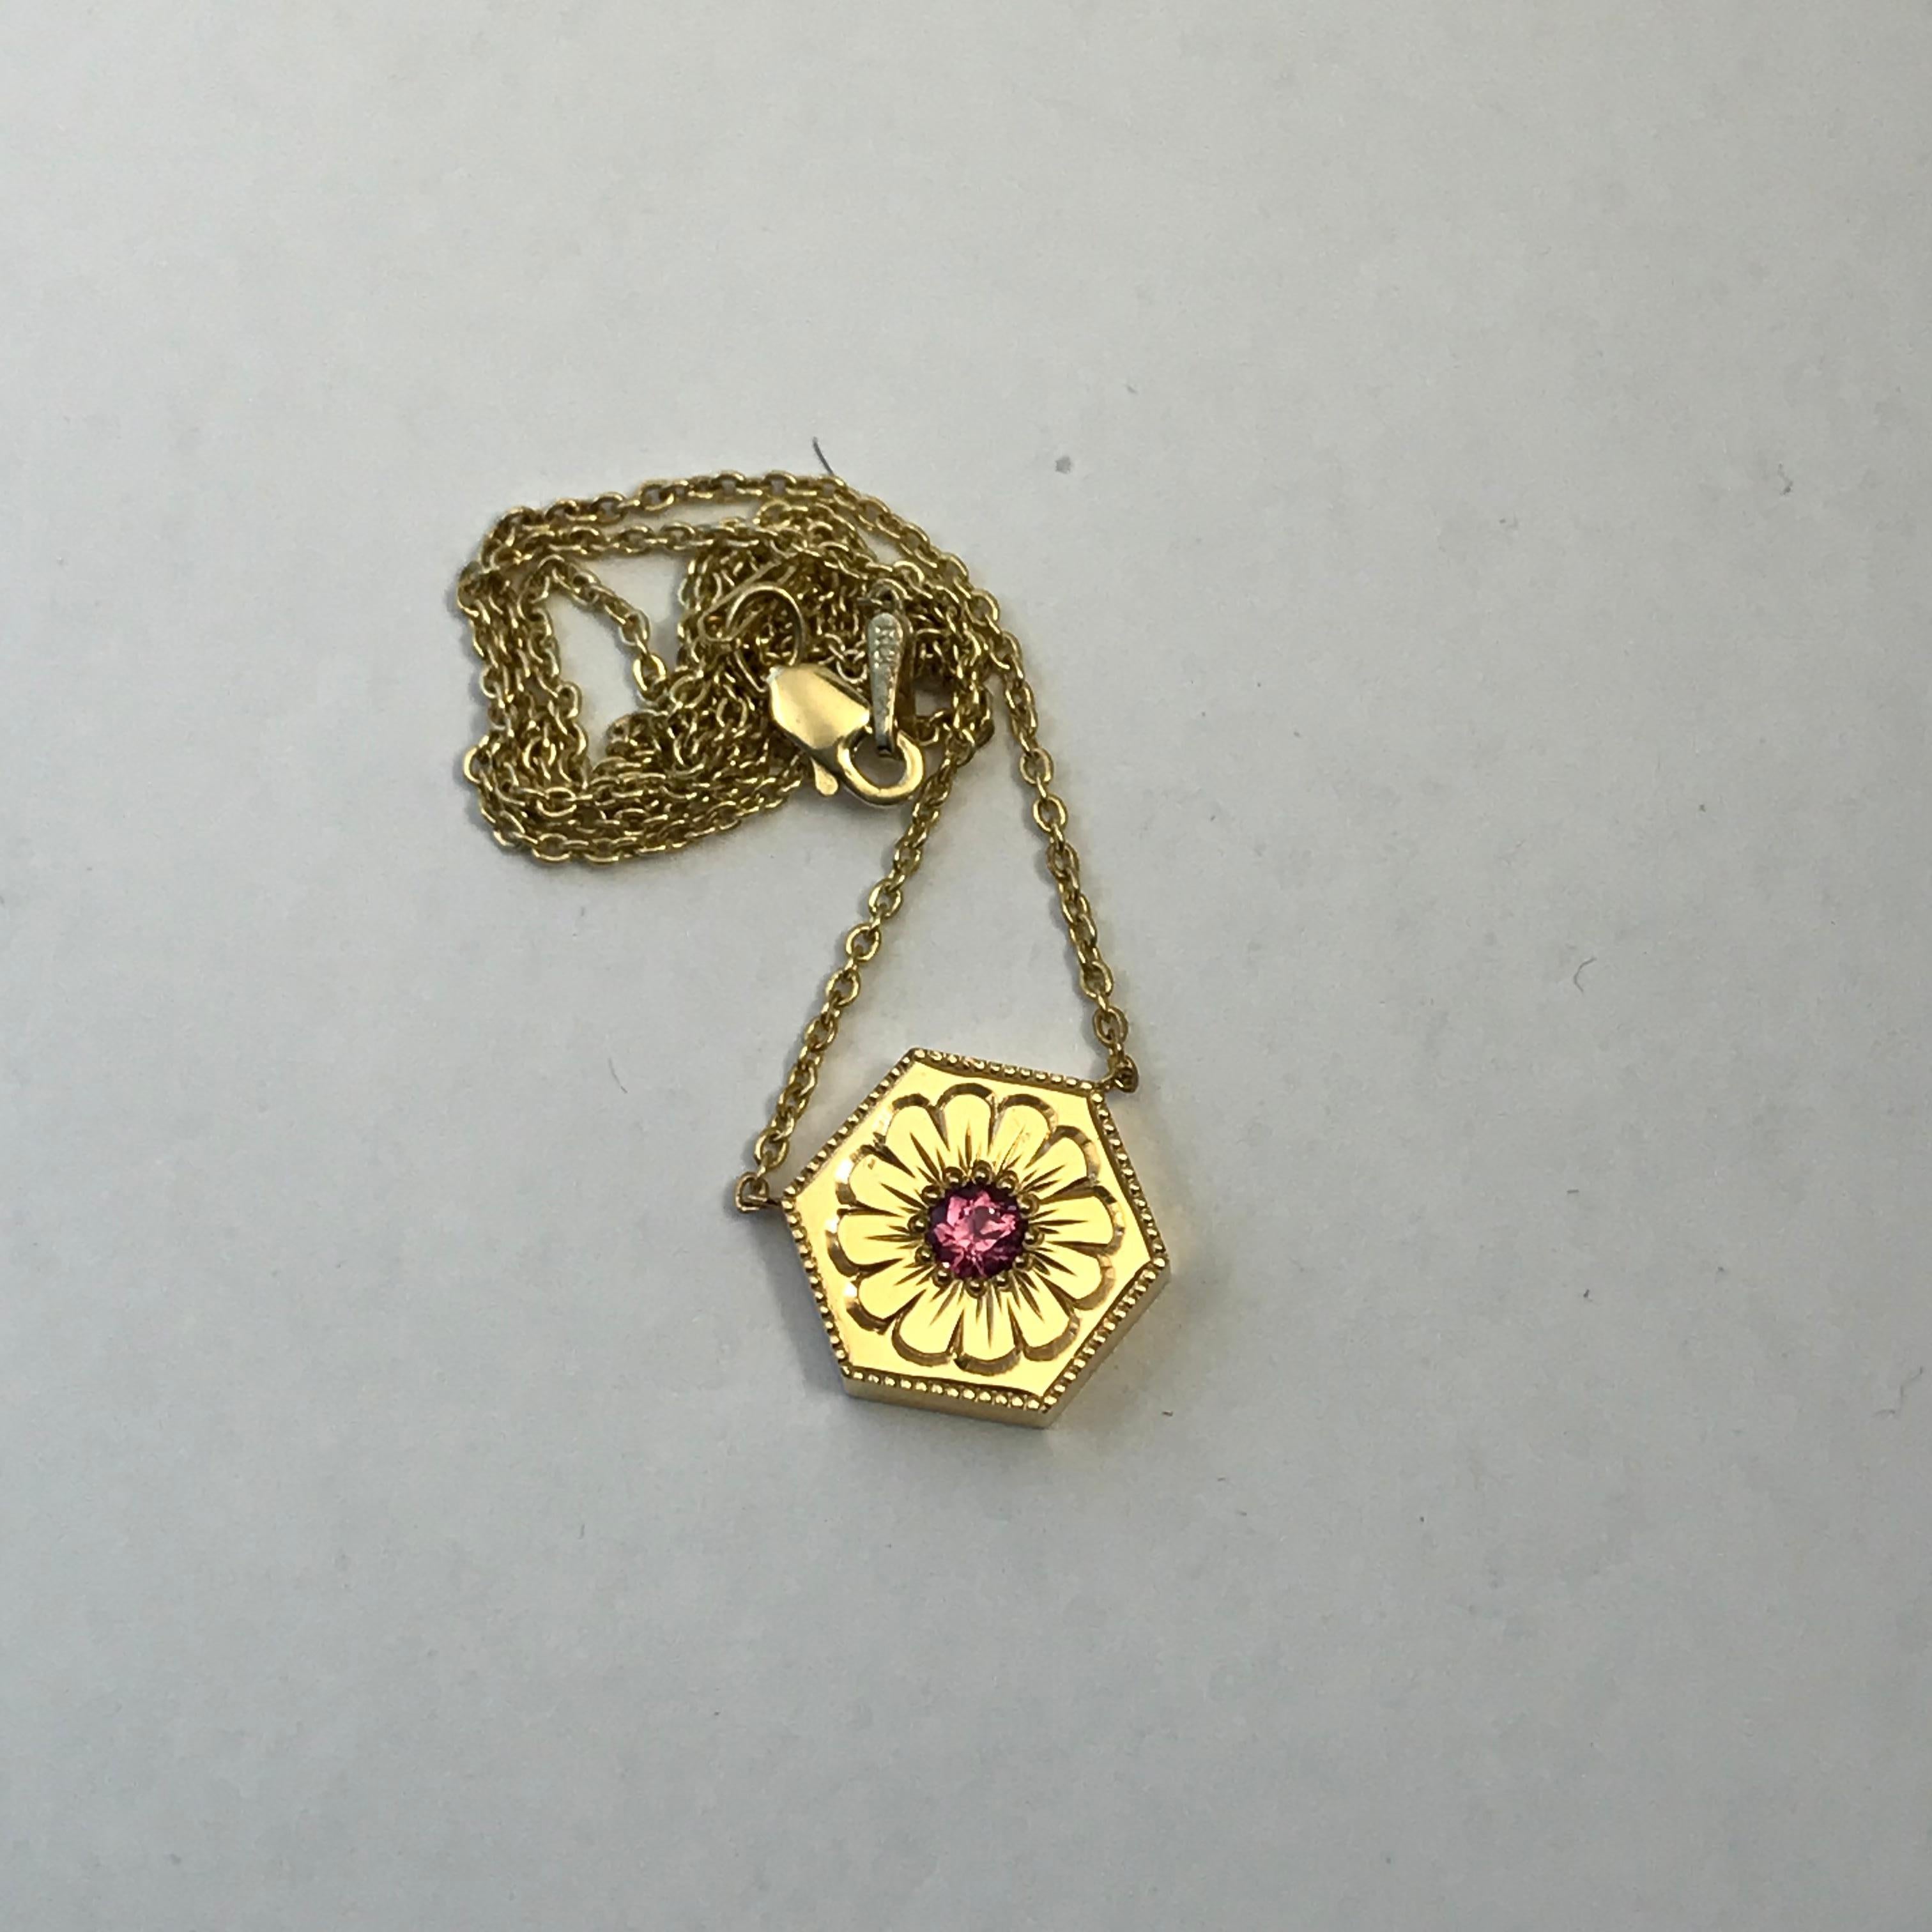 Hexagon Necklace in 14 Karat Gold and Gems-Sapphire For Sale 2